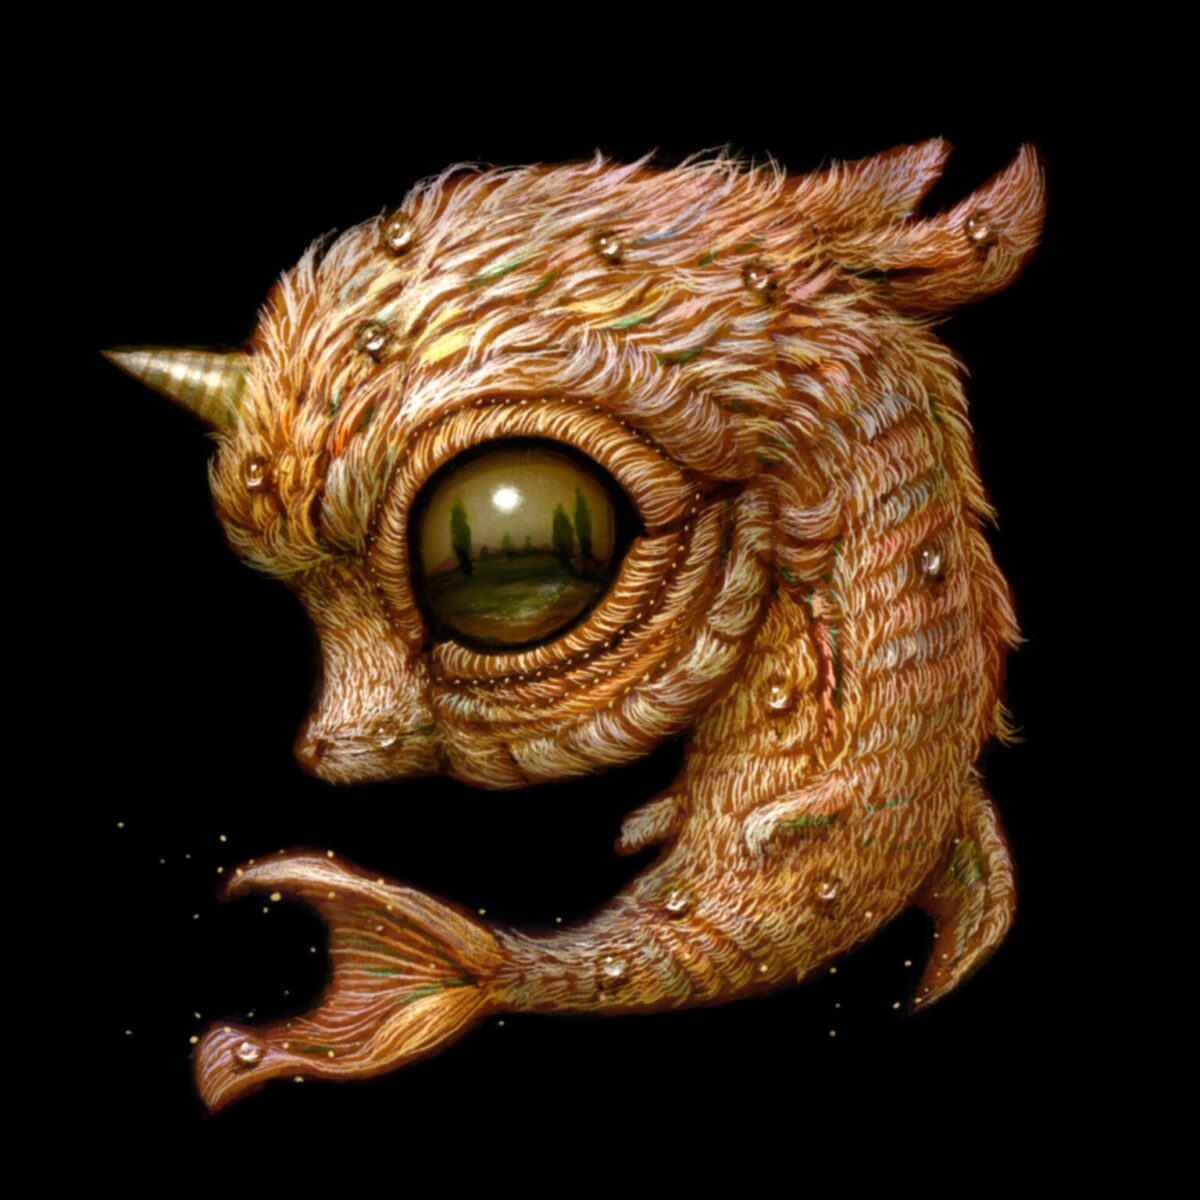 Quirky Fantastical Creatures With Oversized Eyes By Haoto Nattori 7